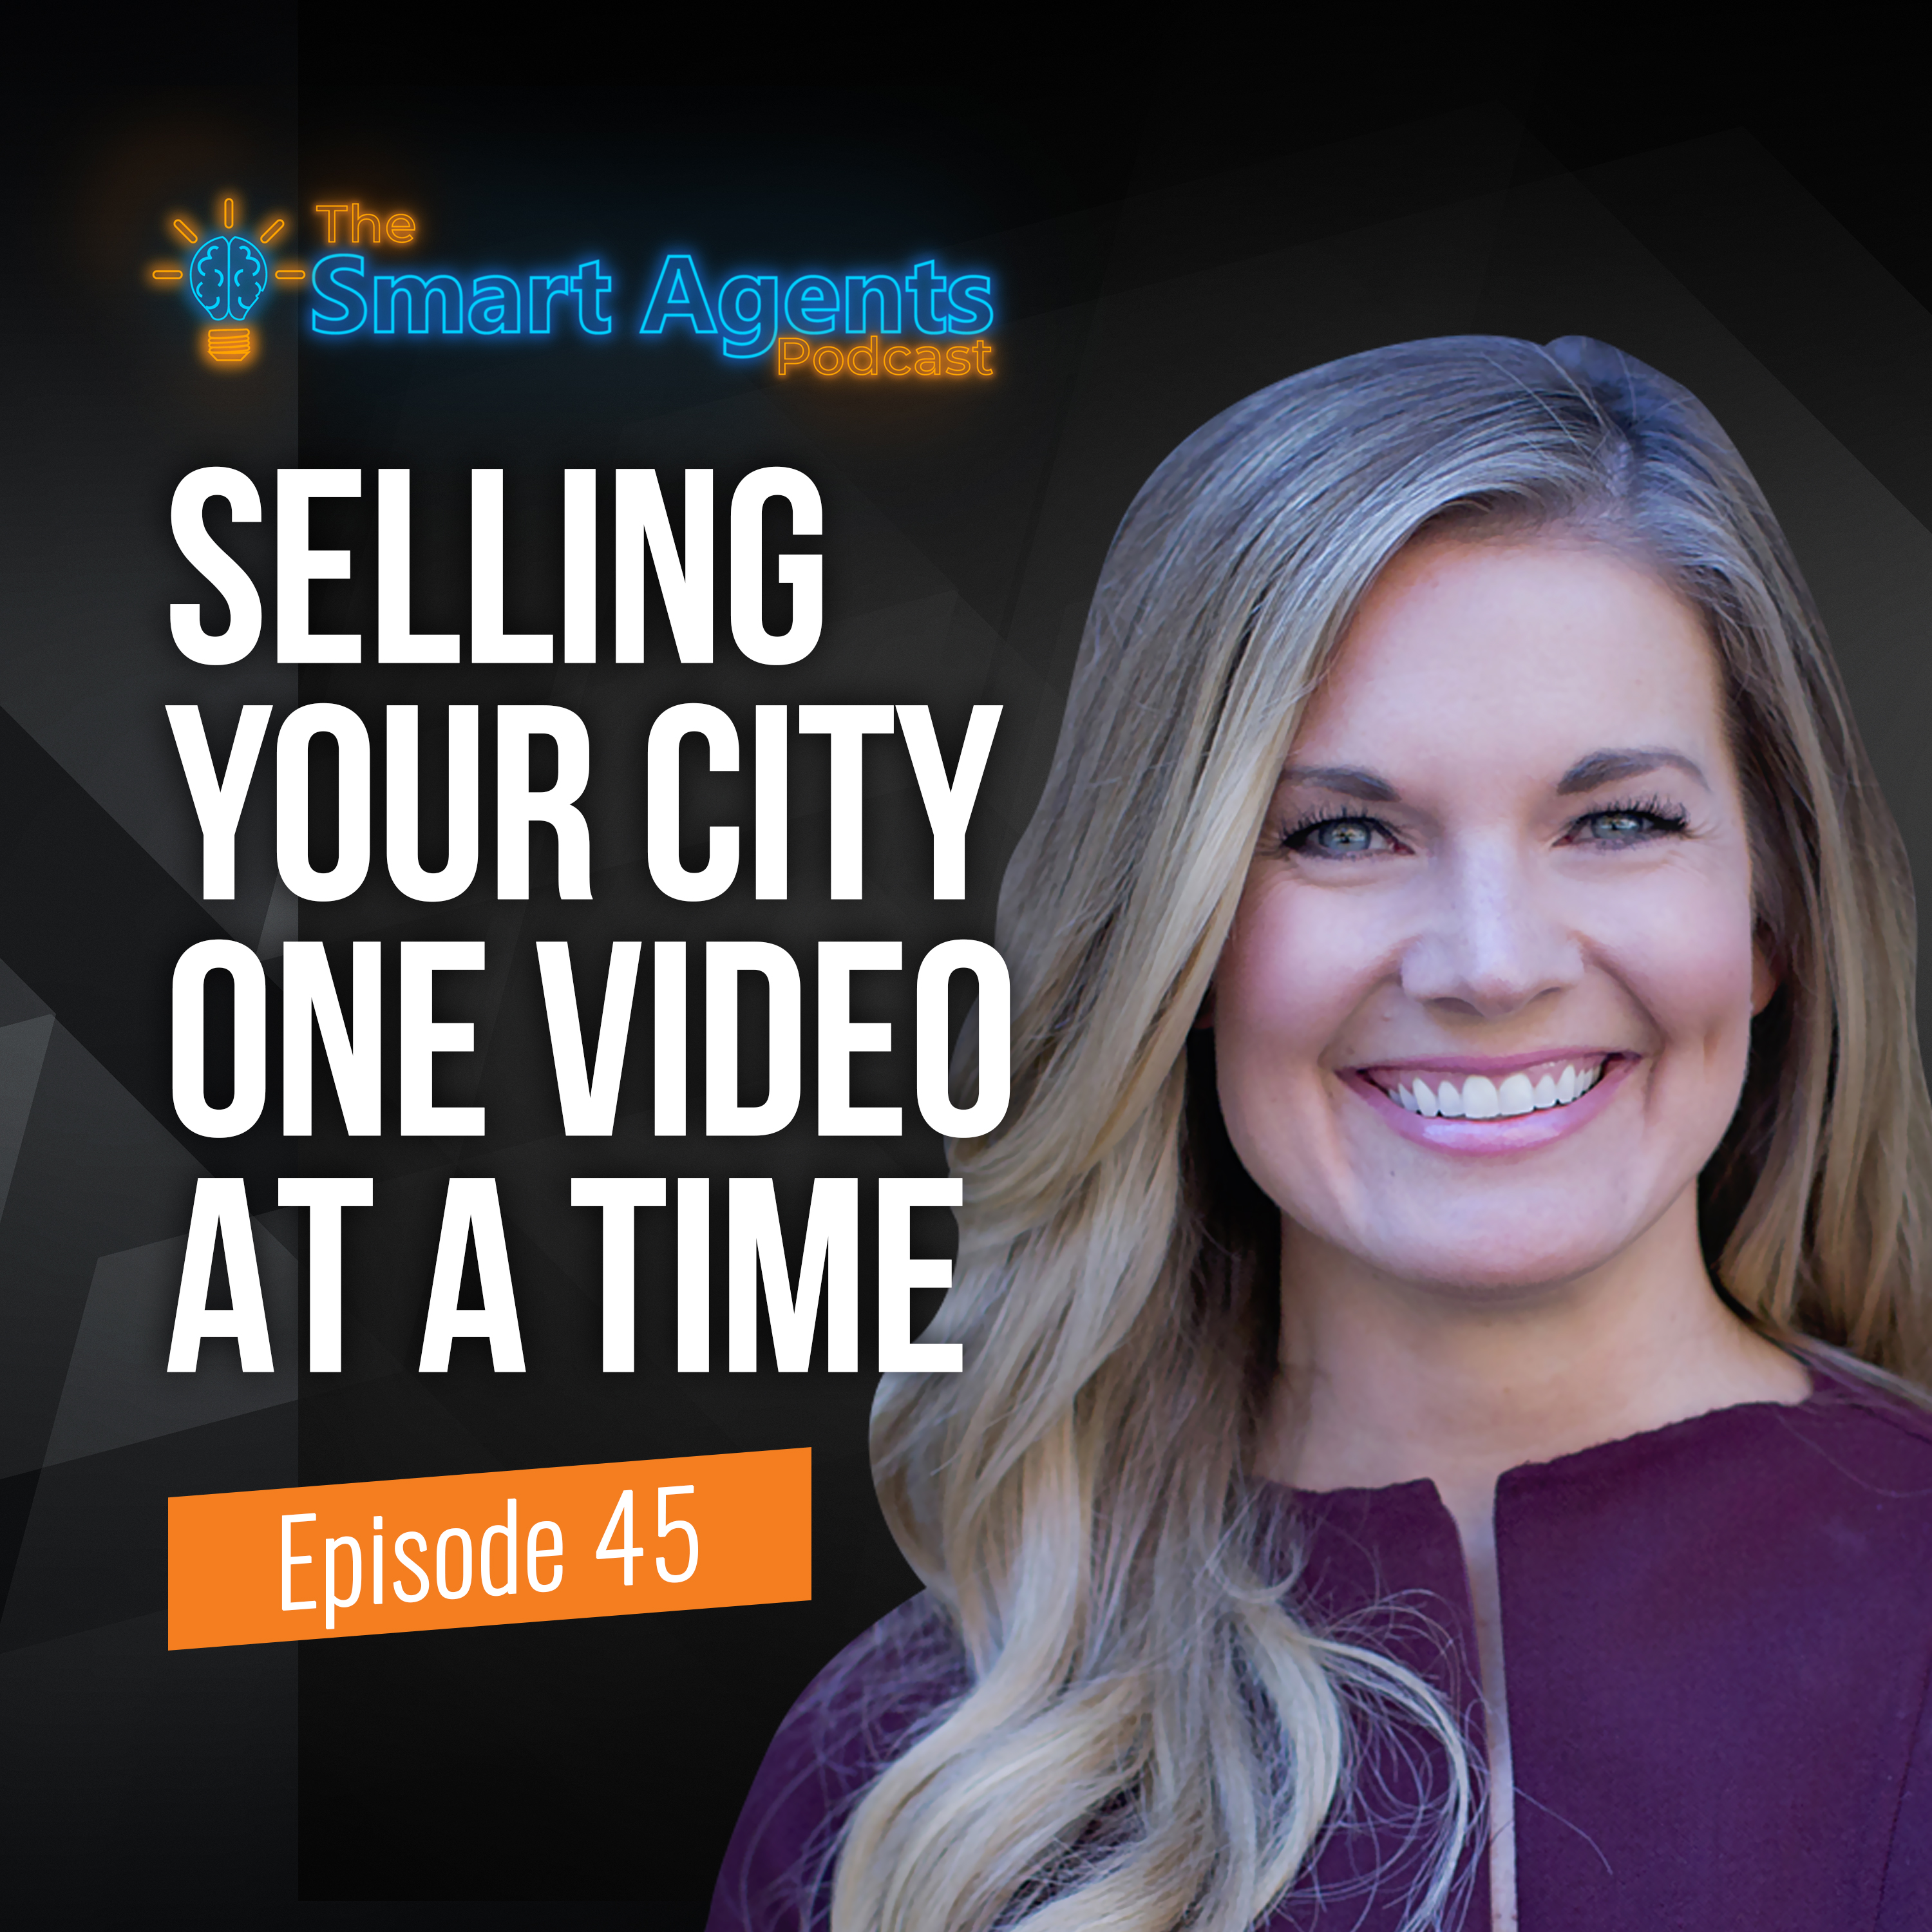 Episode 45: Former News Anchor Finds Success As Relocation Expert